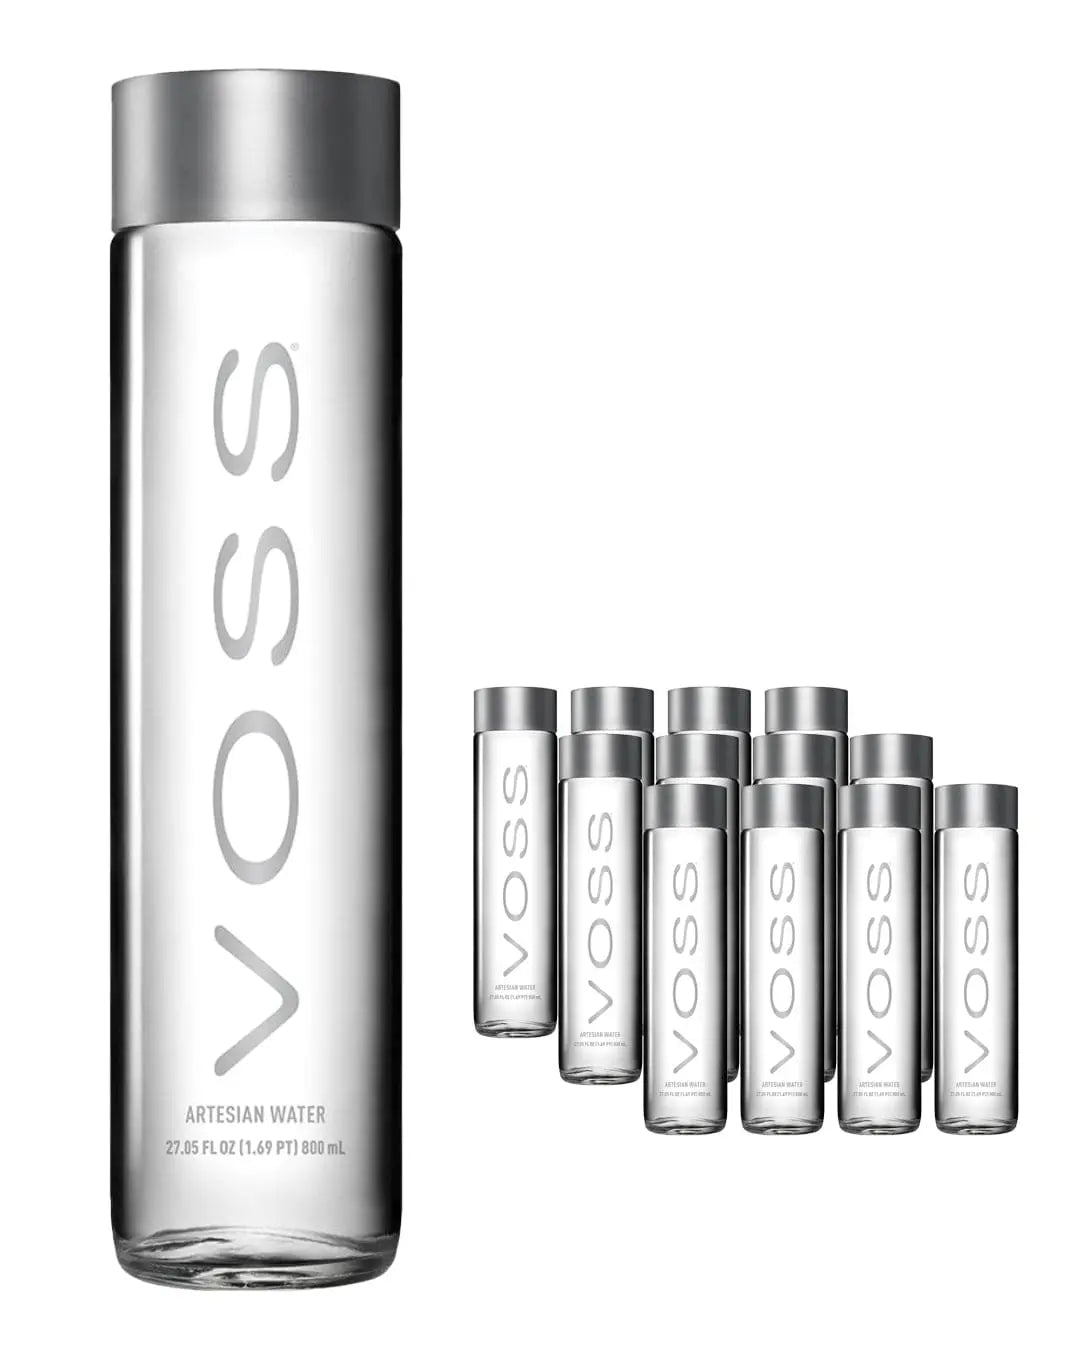 Voss Sparkling Water Glass Bottle Multipack, 12 x 800 ml Water